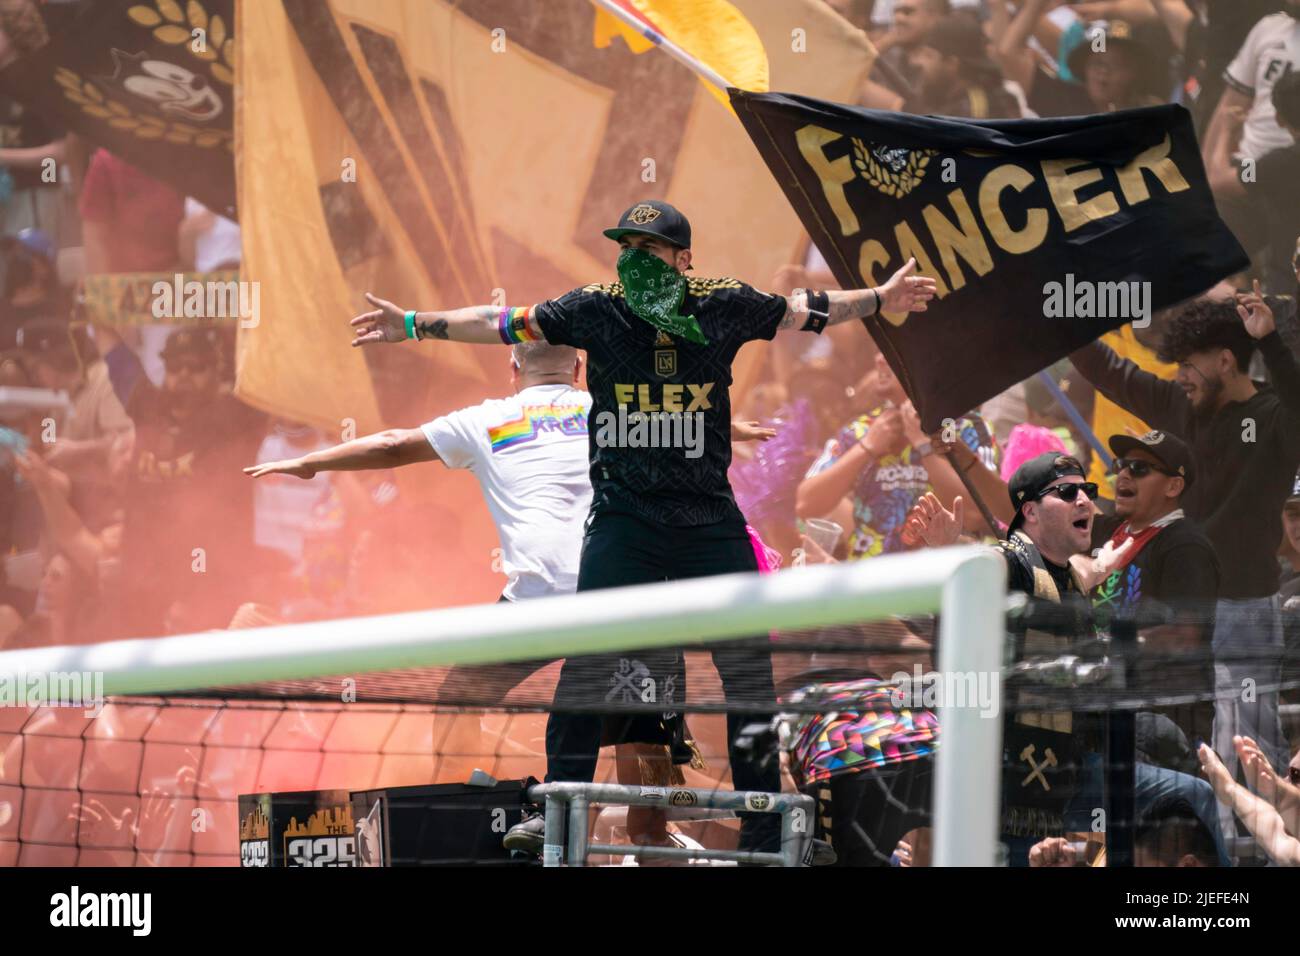 Los Angeles, United States. 26th June, 2022. Fan of the 3252 of Los Angeles FC during a MLS match against the New York Red Bulls, Sunday, June 26, 2022, at the Banc of California Stadium, in Los Angeles, CA. LAFC defeated the Red Bulls 2-0. (Jon Endow/Image of Sport) Photo via Credit: Newscom/Alamy Live News Stock Photo